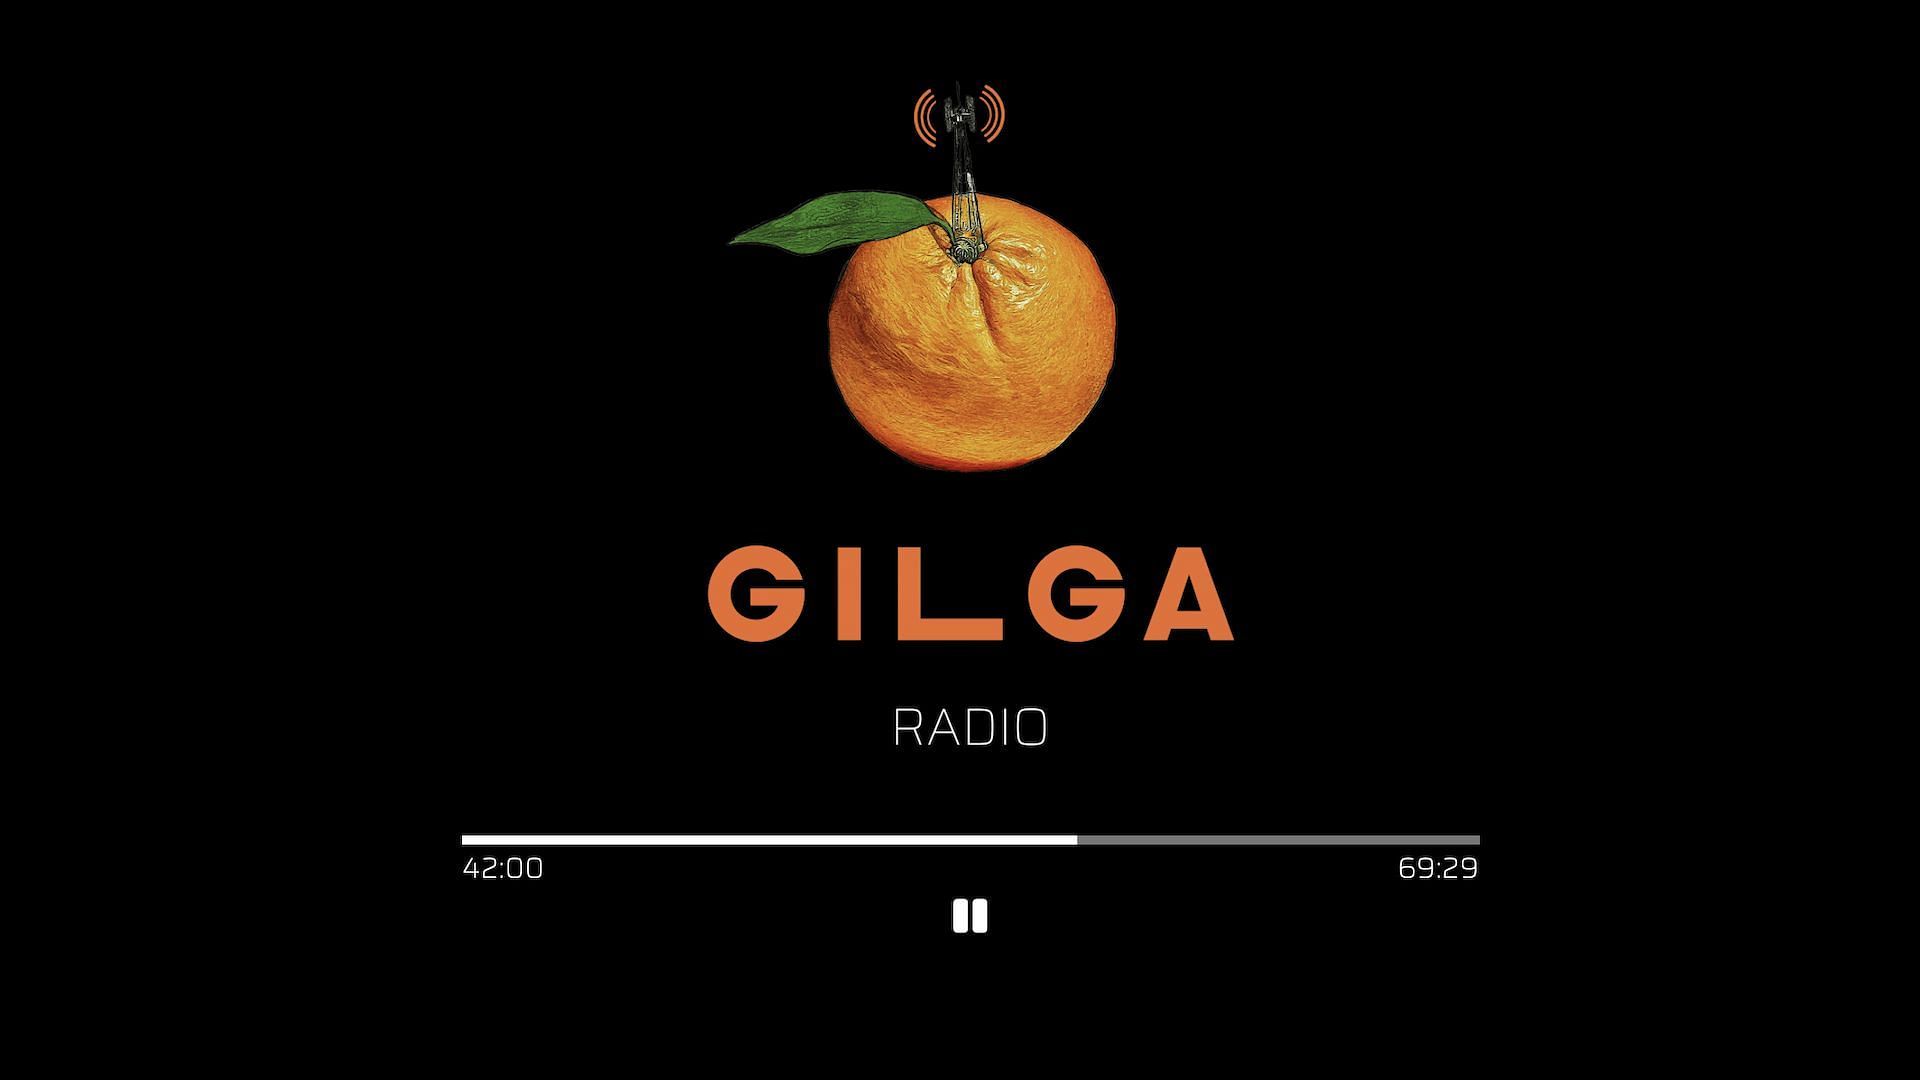 The official website for The Gilga Radio show where Episode 2 is currently uploaded. (Image via Gilga.com)